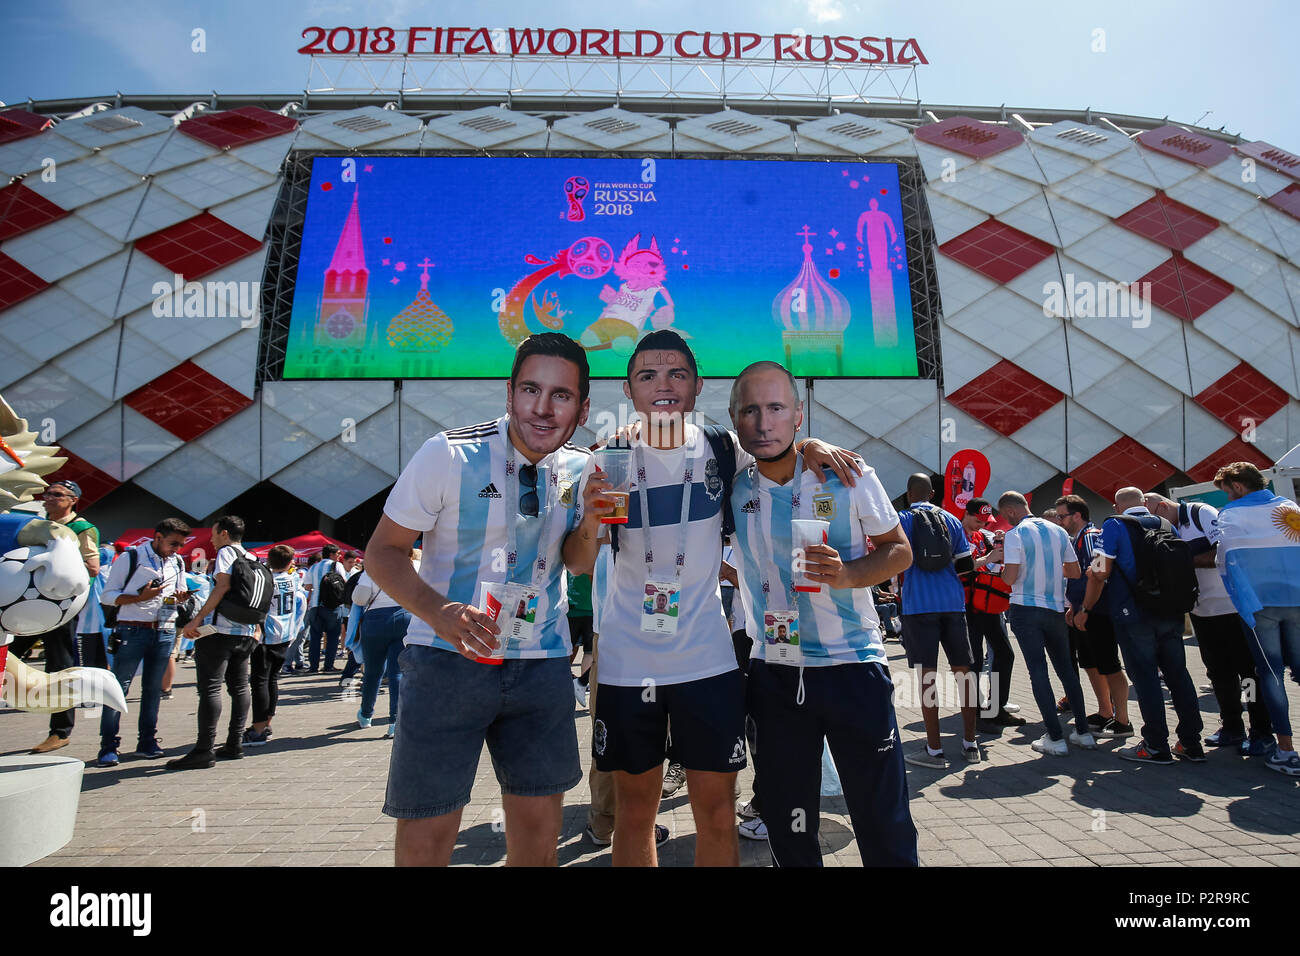 Moscow, Russia. 16th Jun, 2018. Argentina fans pose in Lionel Messi, Cristiano Ronaldo and Vladimir Putin masks before the 2018 FIFA World Cup Group D match between Argentina and Iceland at Spartak Stadium on June 16th 2018 in Moscow, Russia. (Photo by Daniel Chesterton/phcimages.com) Credit: PHC Images/Alamy Live News Stock Photo